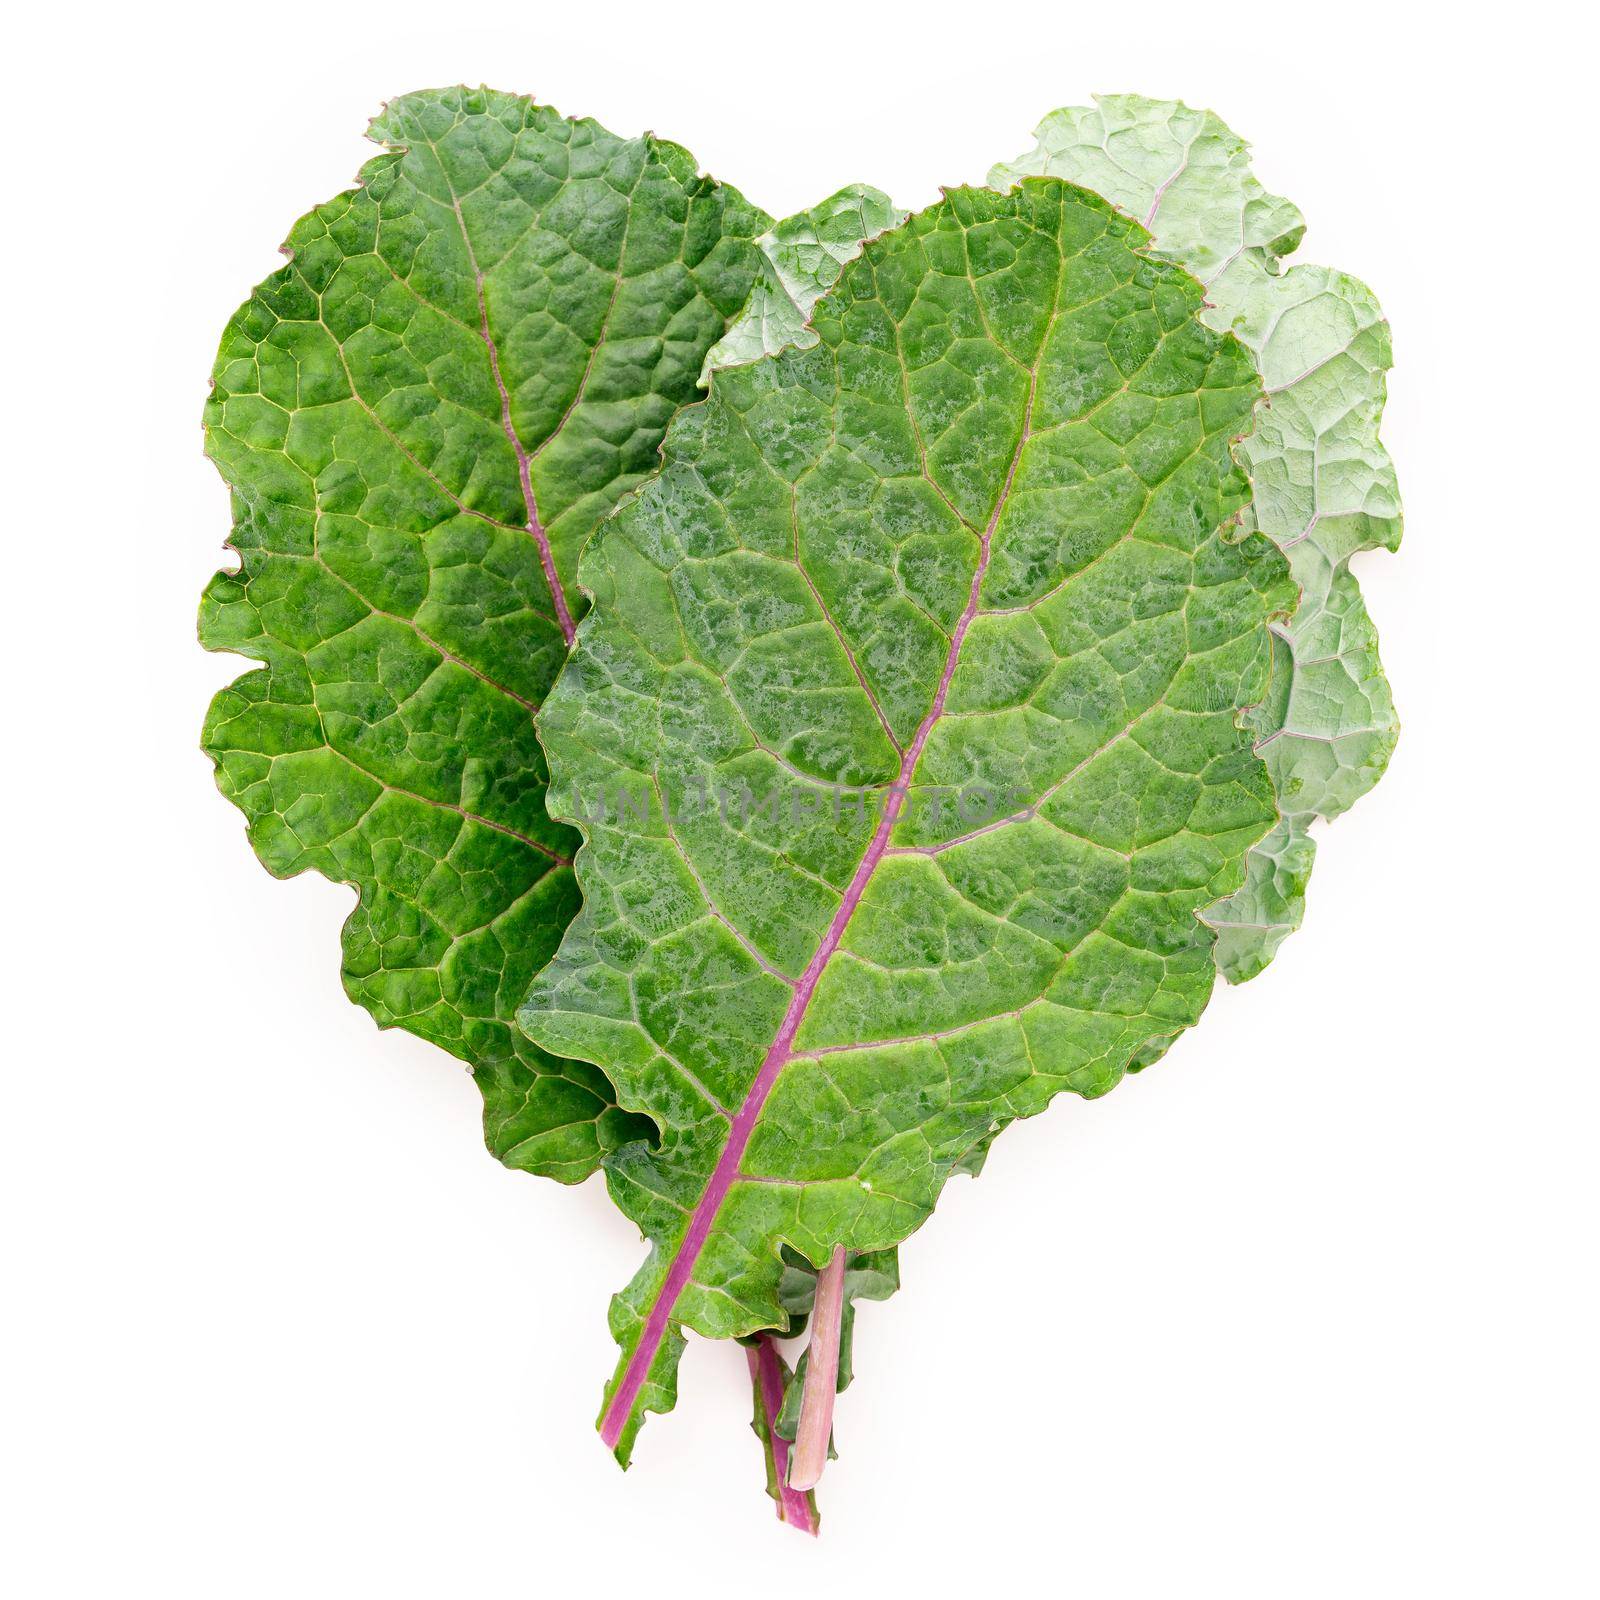 Flat lay fresh kale leaves in heart shape isolated on white background. Top view love healthy organic food. by kerdkanno